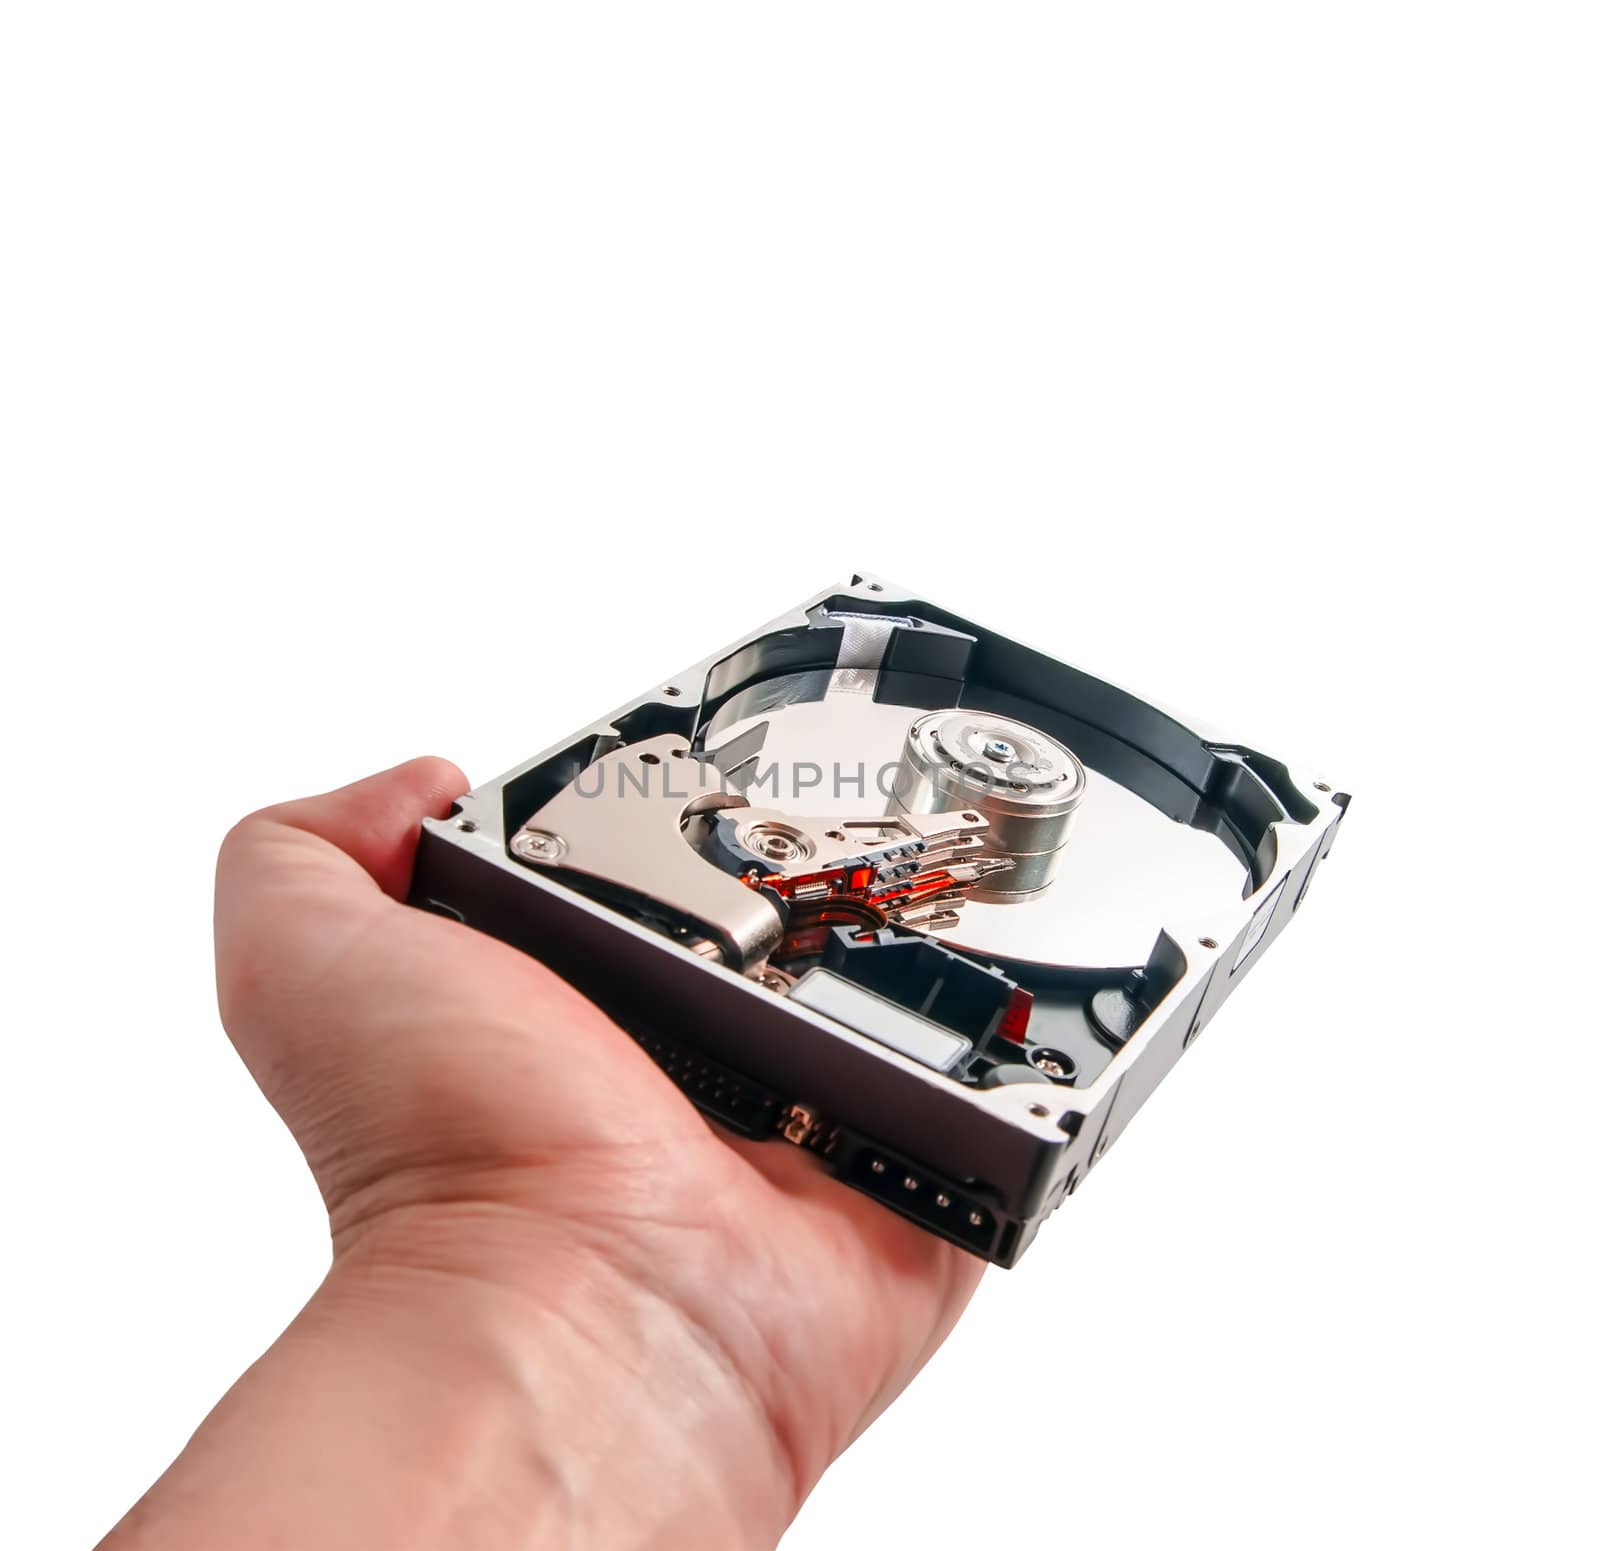 hard disk in hand isolated on a white background by Zhukow